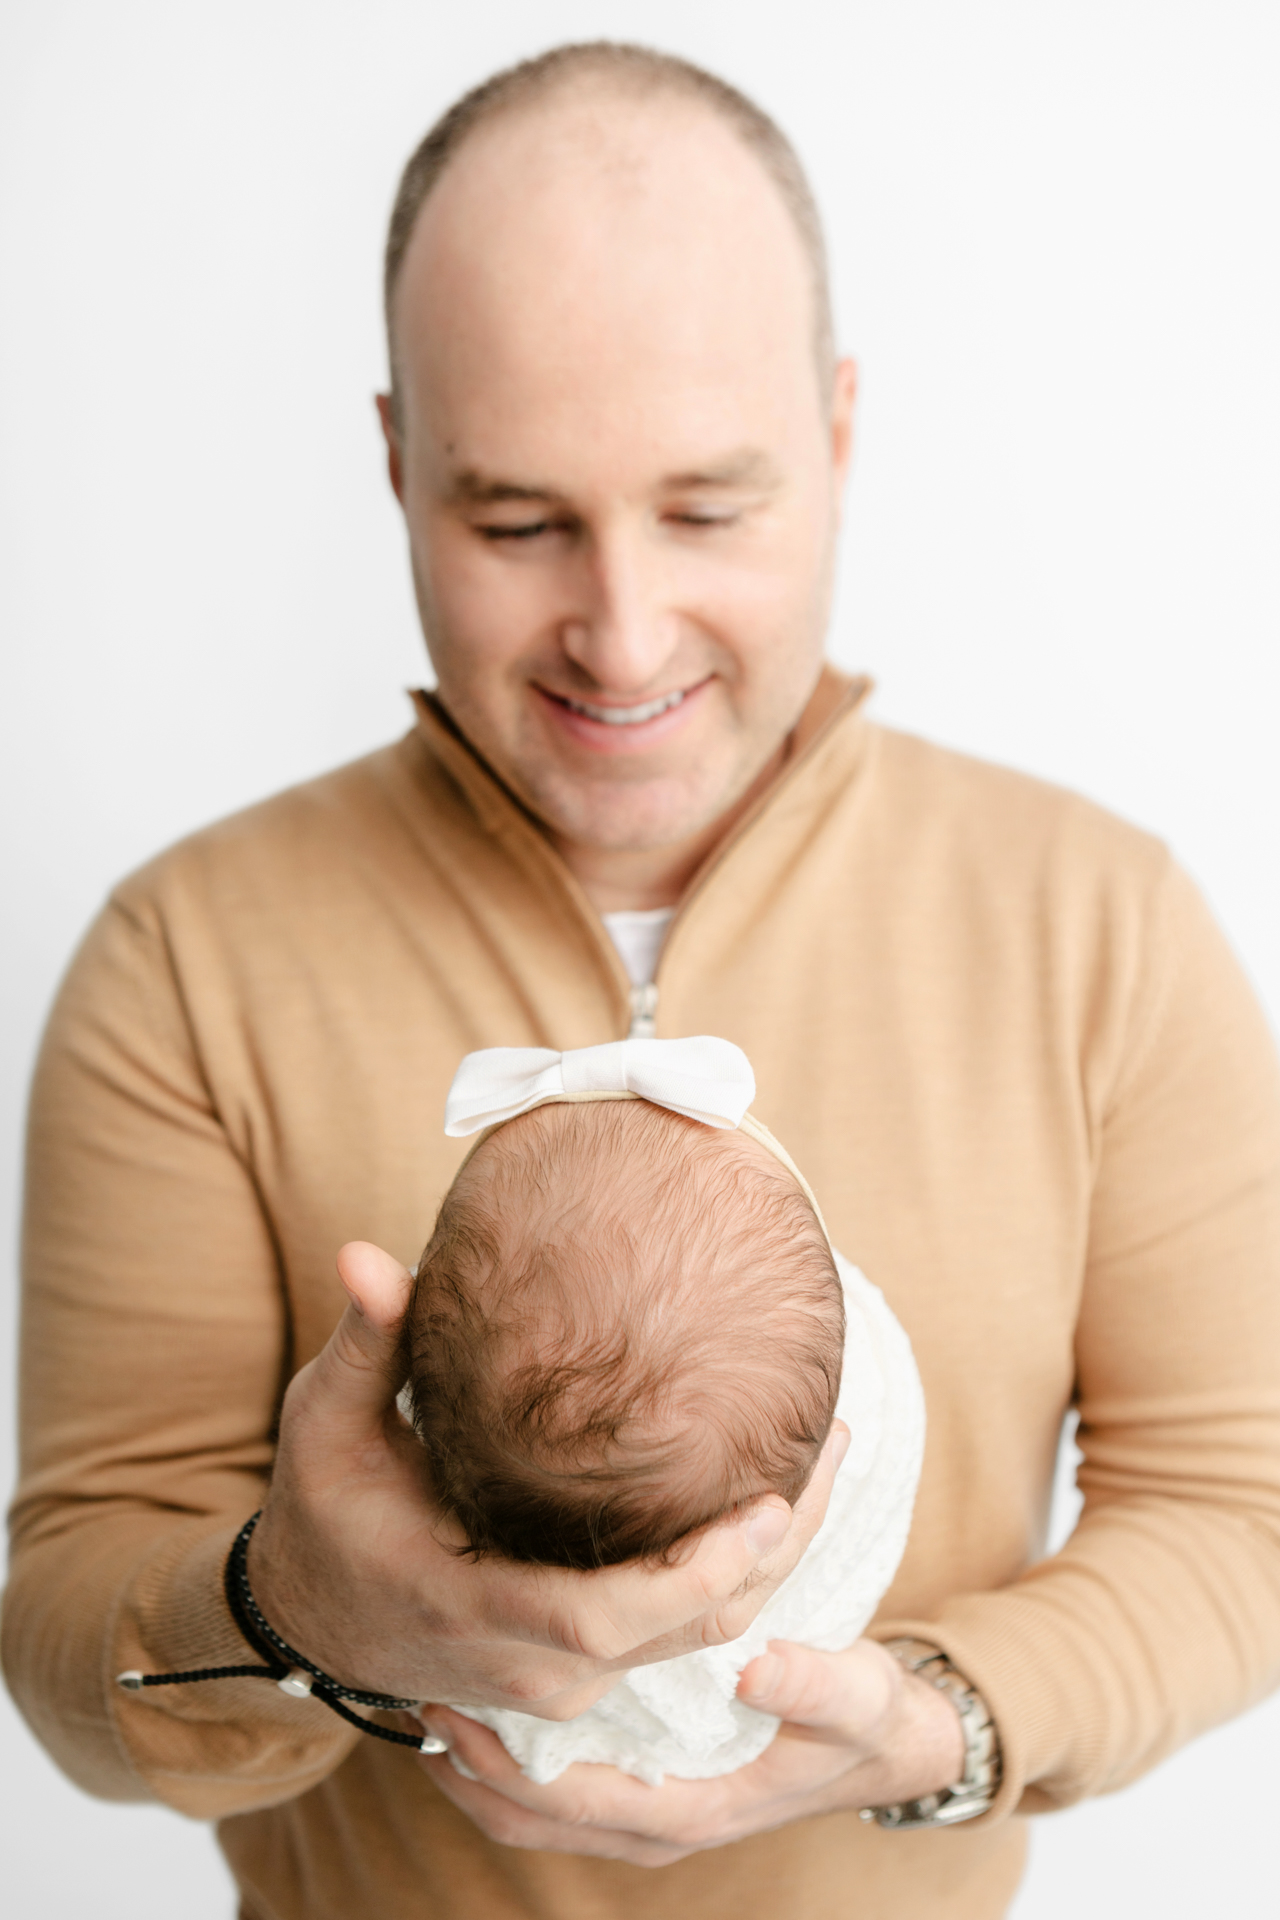 new father holding his baby girl in his hands and smiling down at her; studio newborn photography